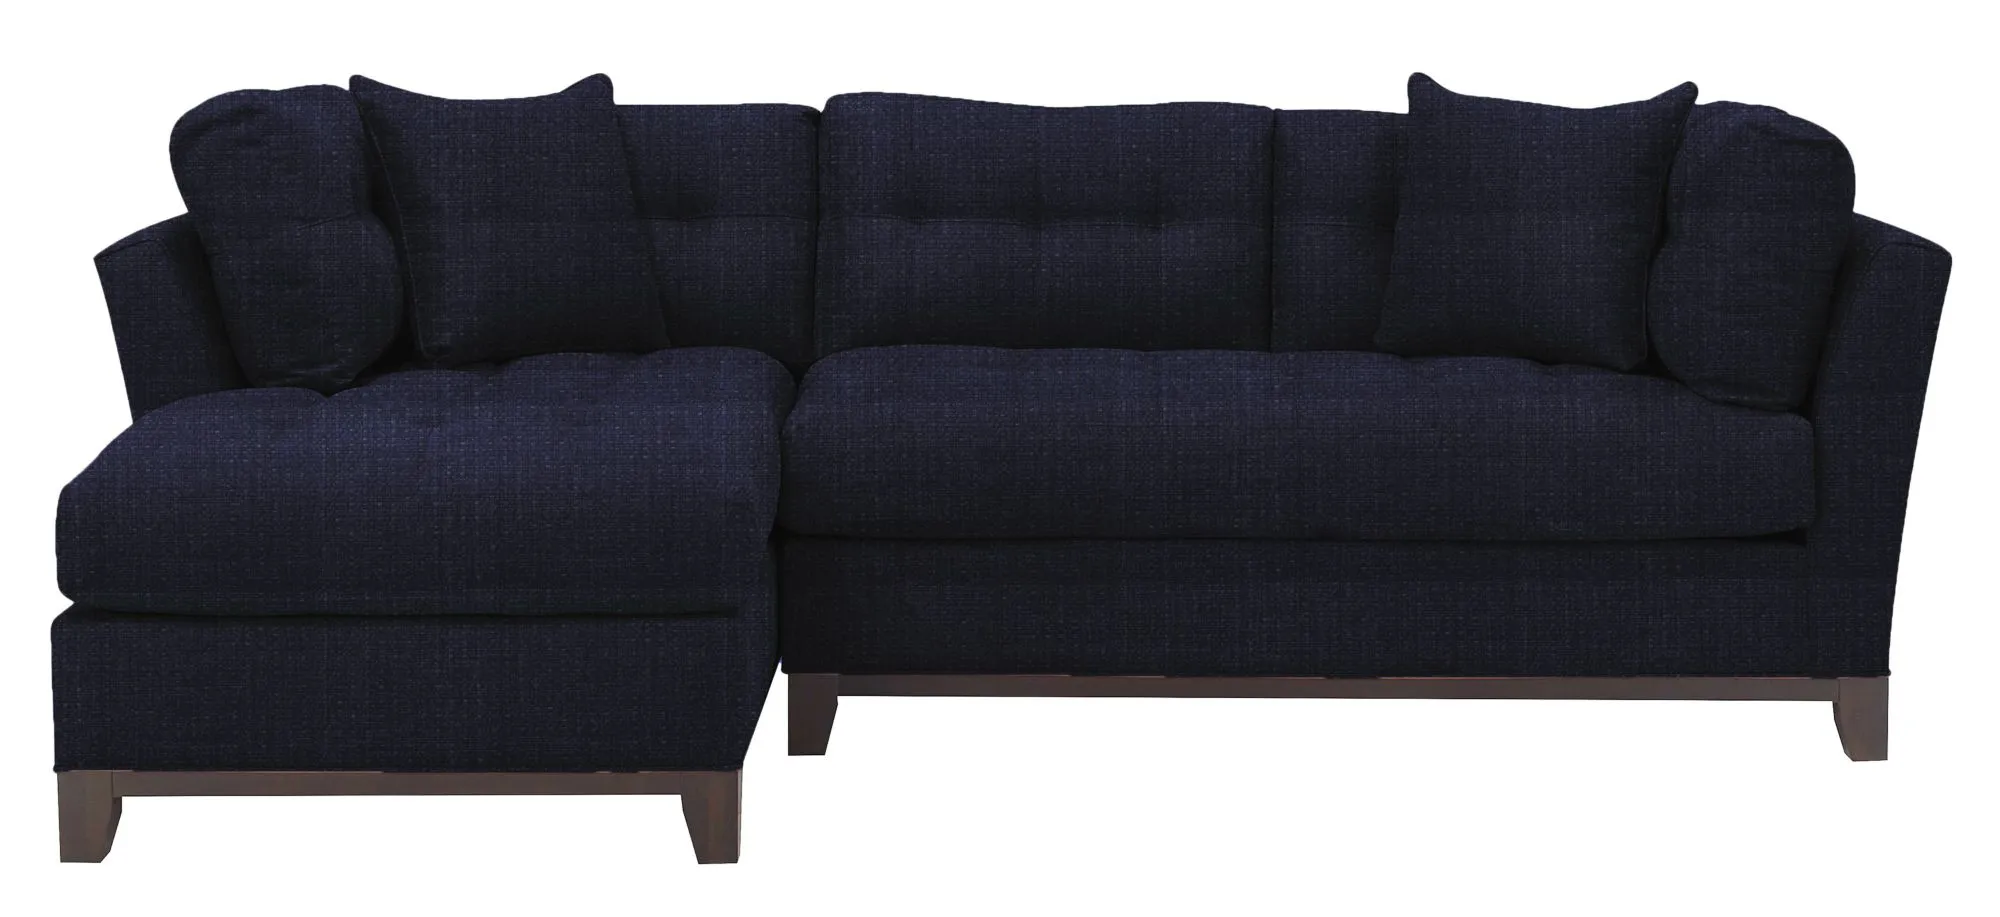 Cityscape 2-pc. Sectional in Sugar Shack Navy by H.M. Richards